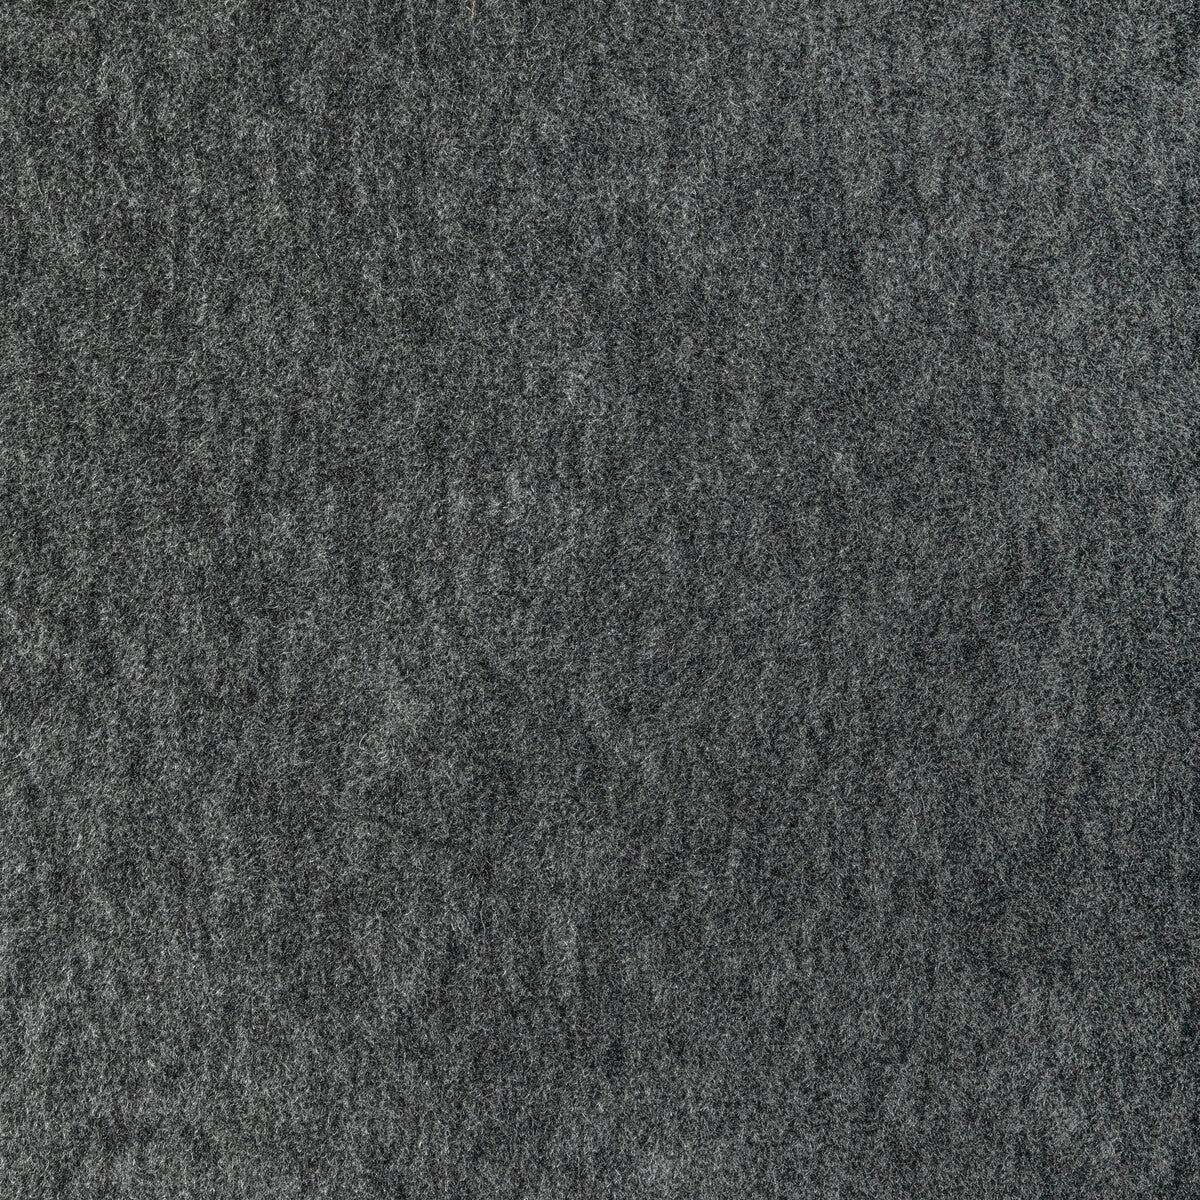 Chic Alpaca fabric in flannel color - pattern 33837.11.0 - by Kravet Couture